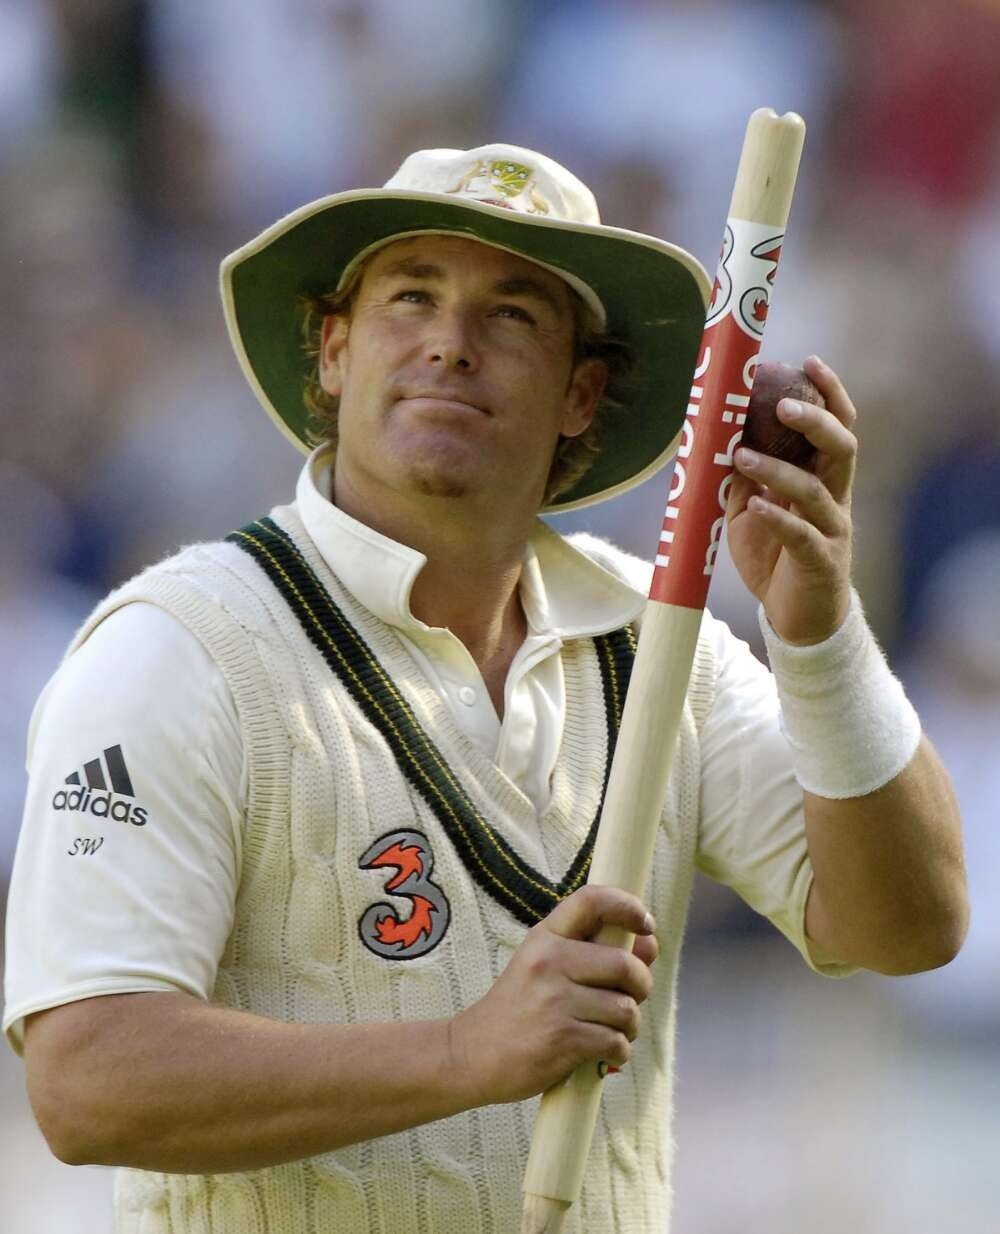 A photo of Shane Warne, dressed in test cricket whites and a hat, looking up at the crowd while holding a cricket ball against a stump he is holding in his other hand.